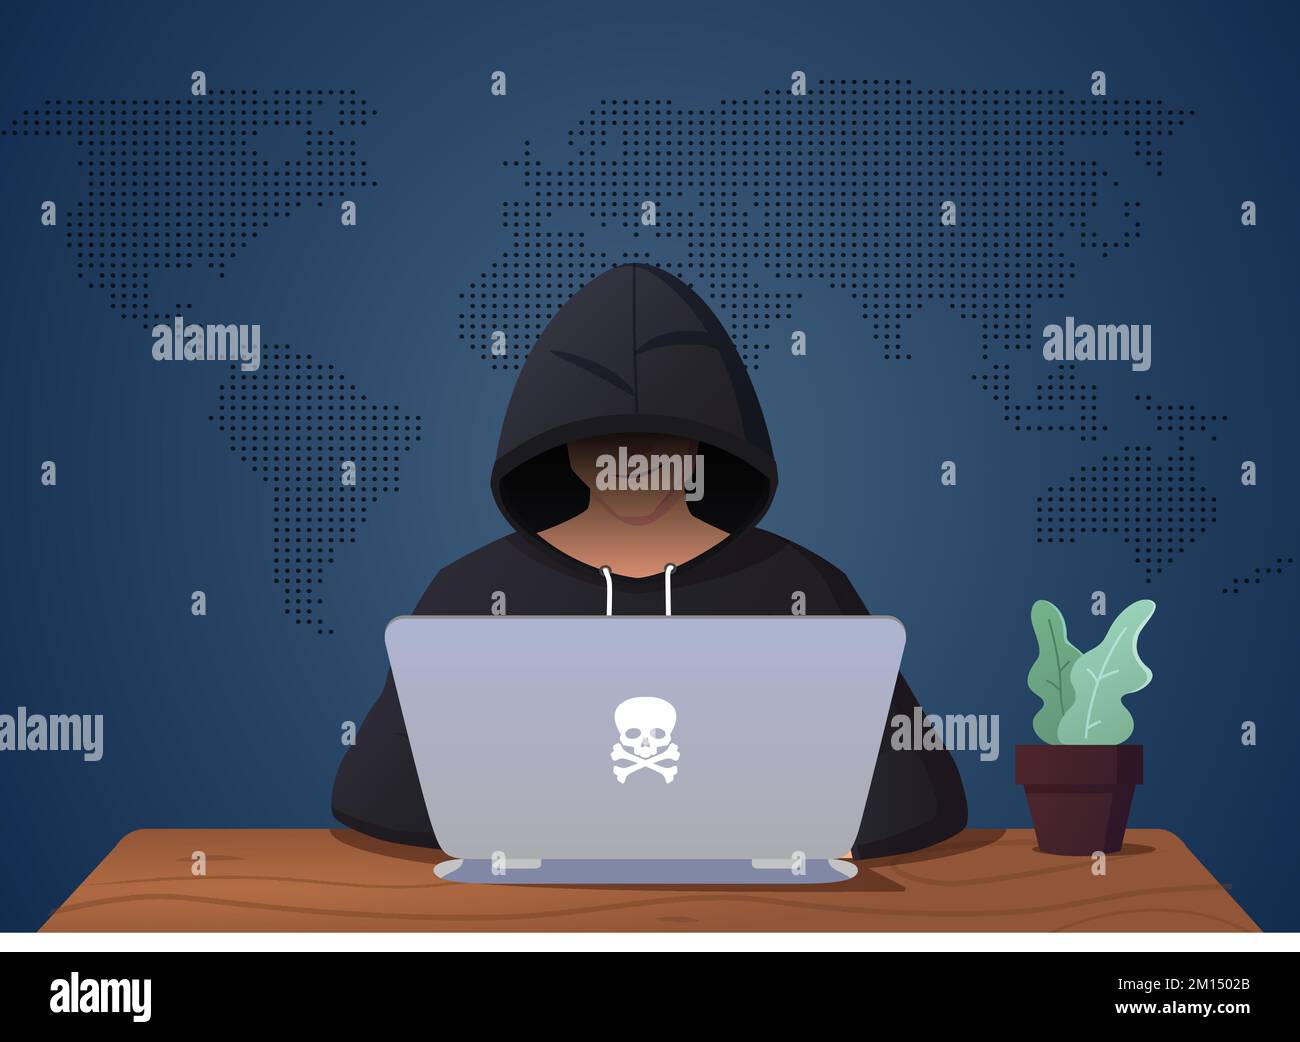 Hacker Hacking On Laptop, Man in Disguise Illustration Stock Vector